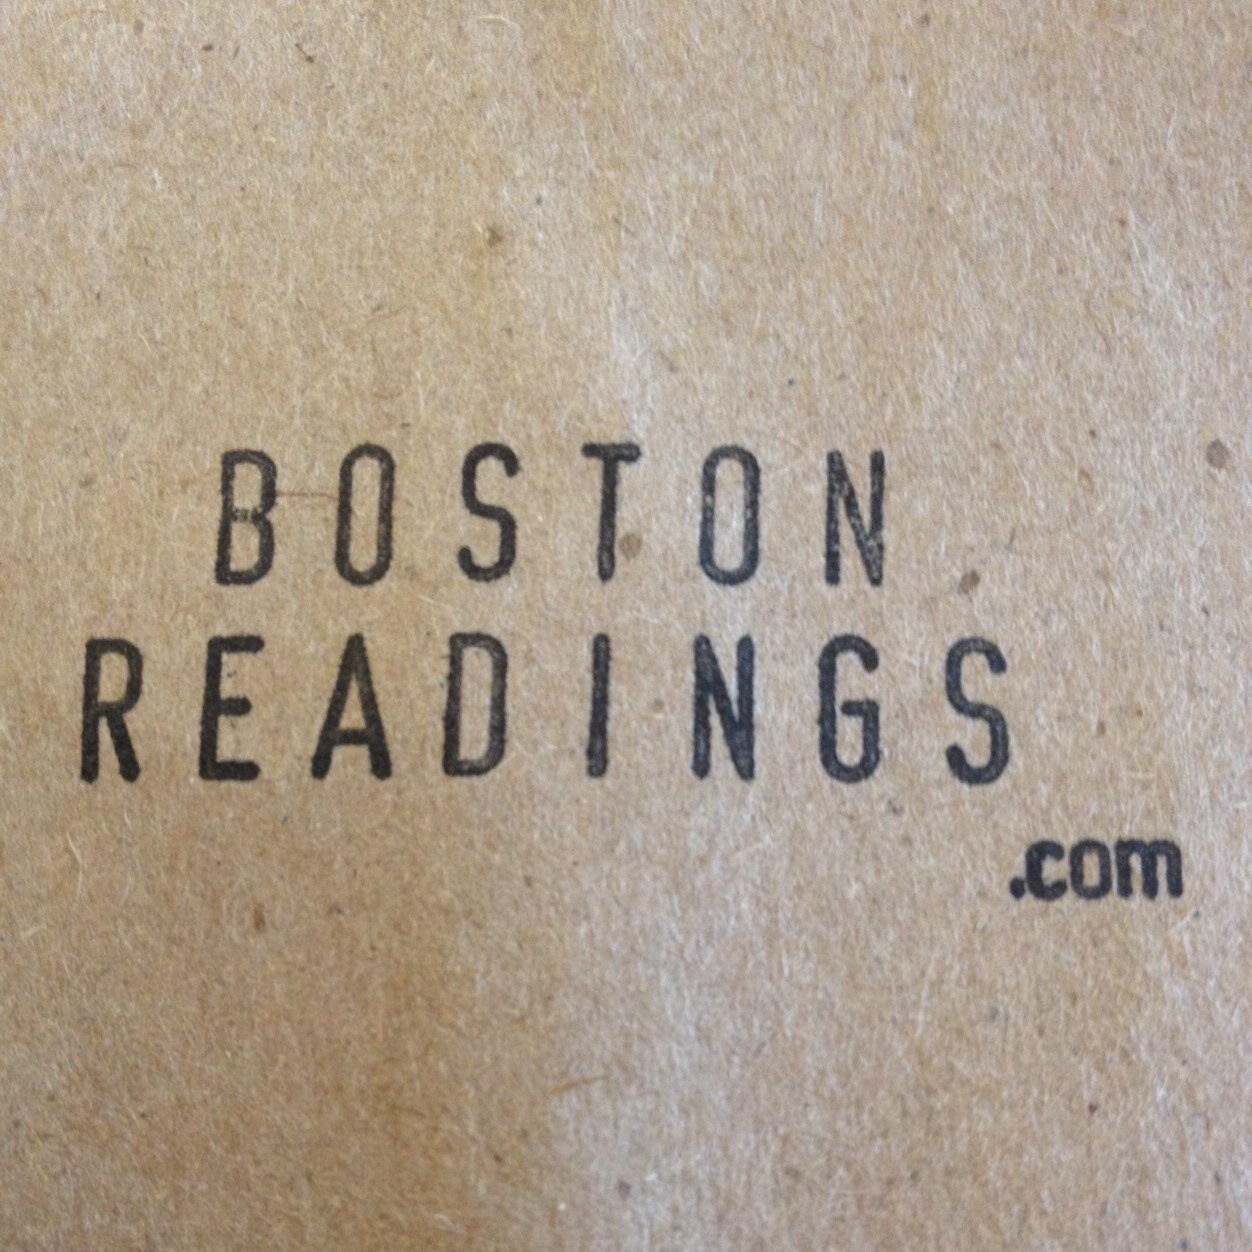 Literature and poetry readings in the Boston/Cambridge area.